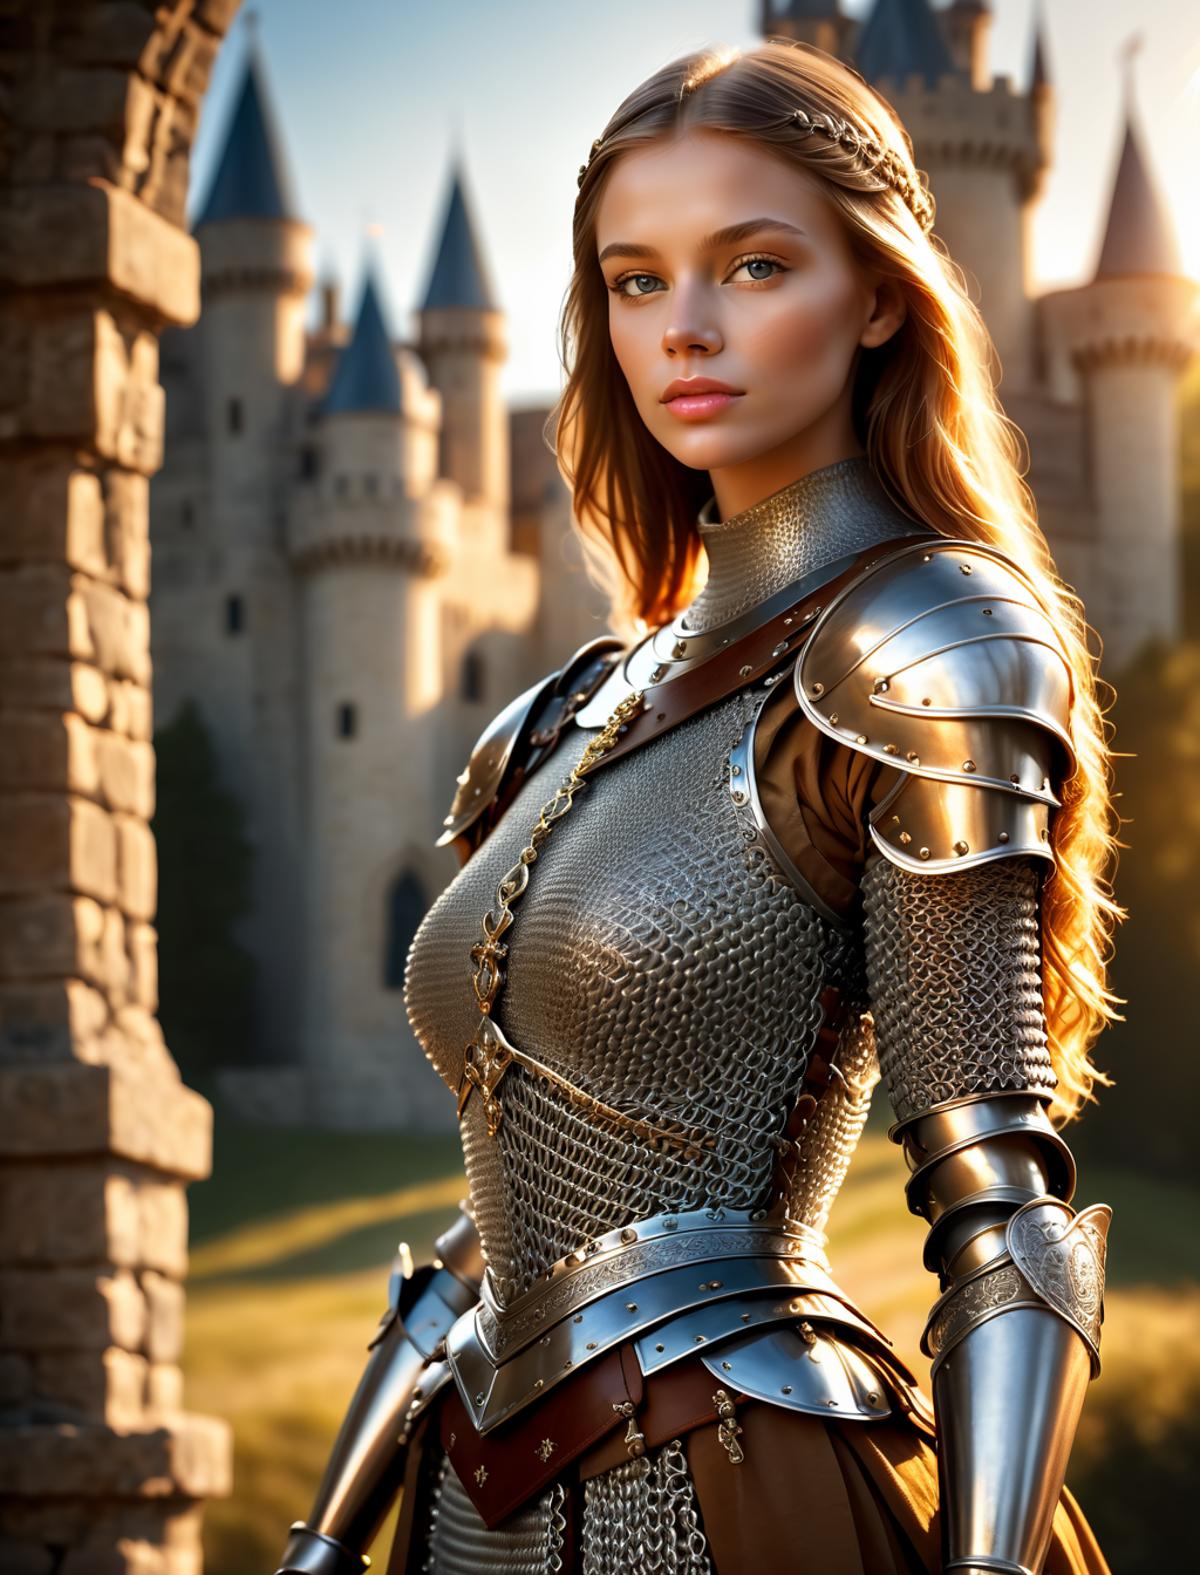 A woman in a chain mail dress stands in front of a castle.